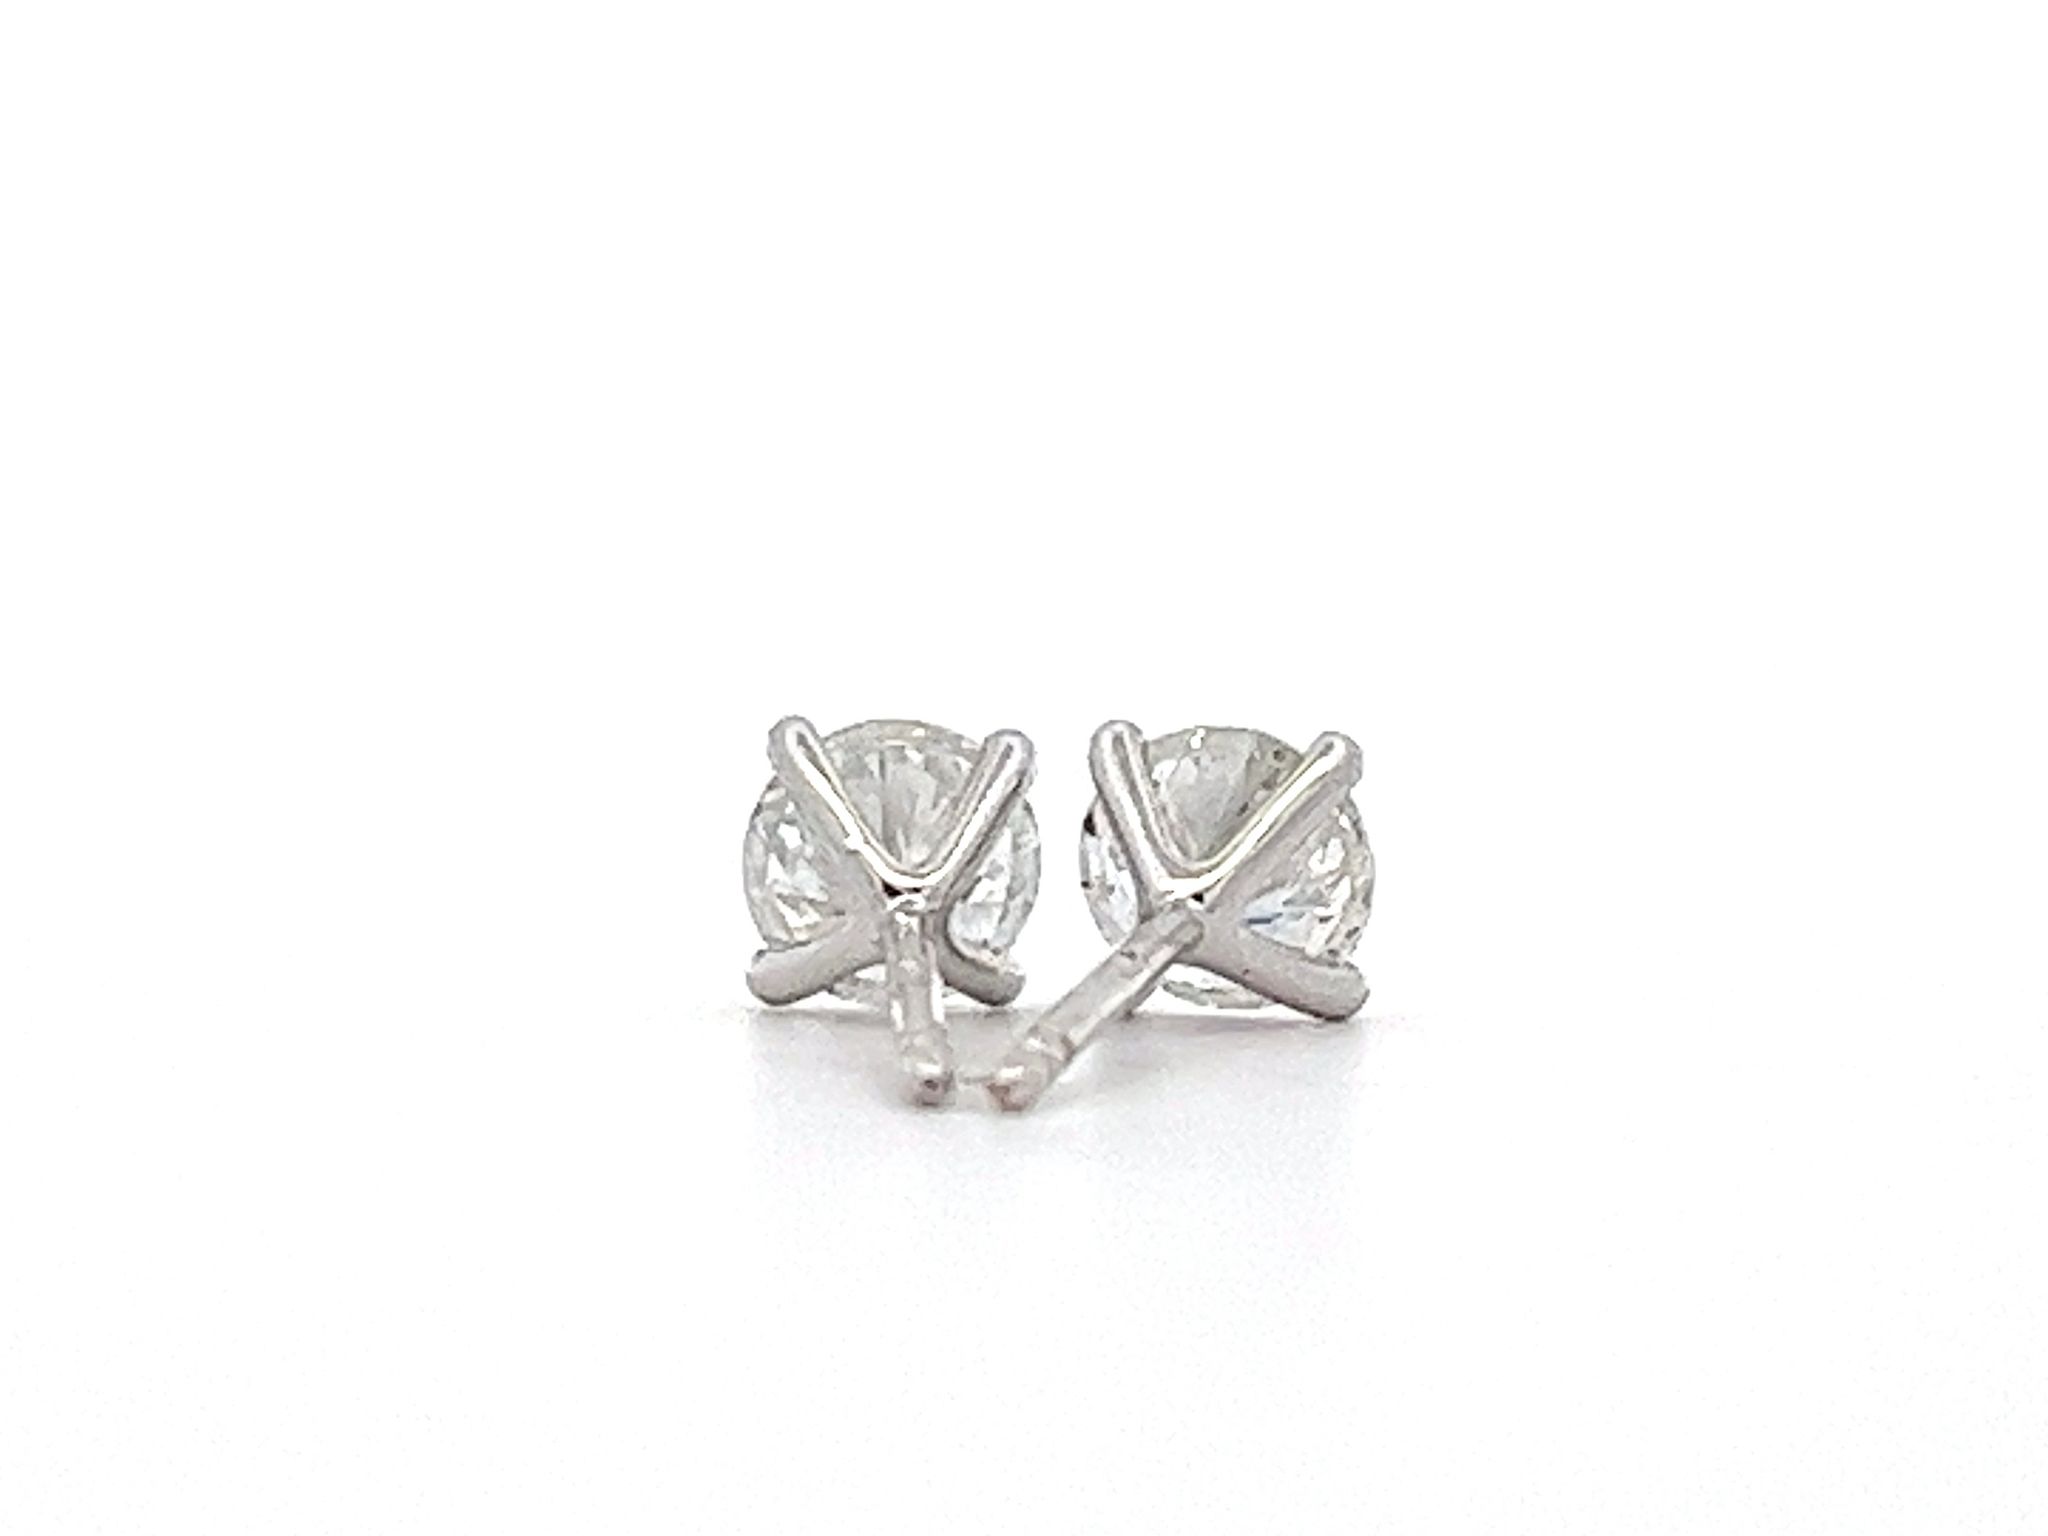 1.00ct Brilliant Cut Diamond Stud Earrings in 18ct White Gold – GIA Certificated